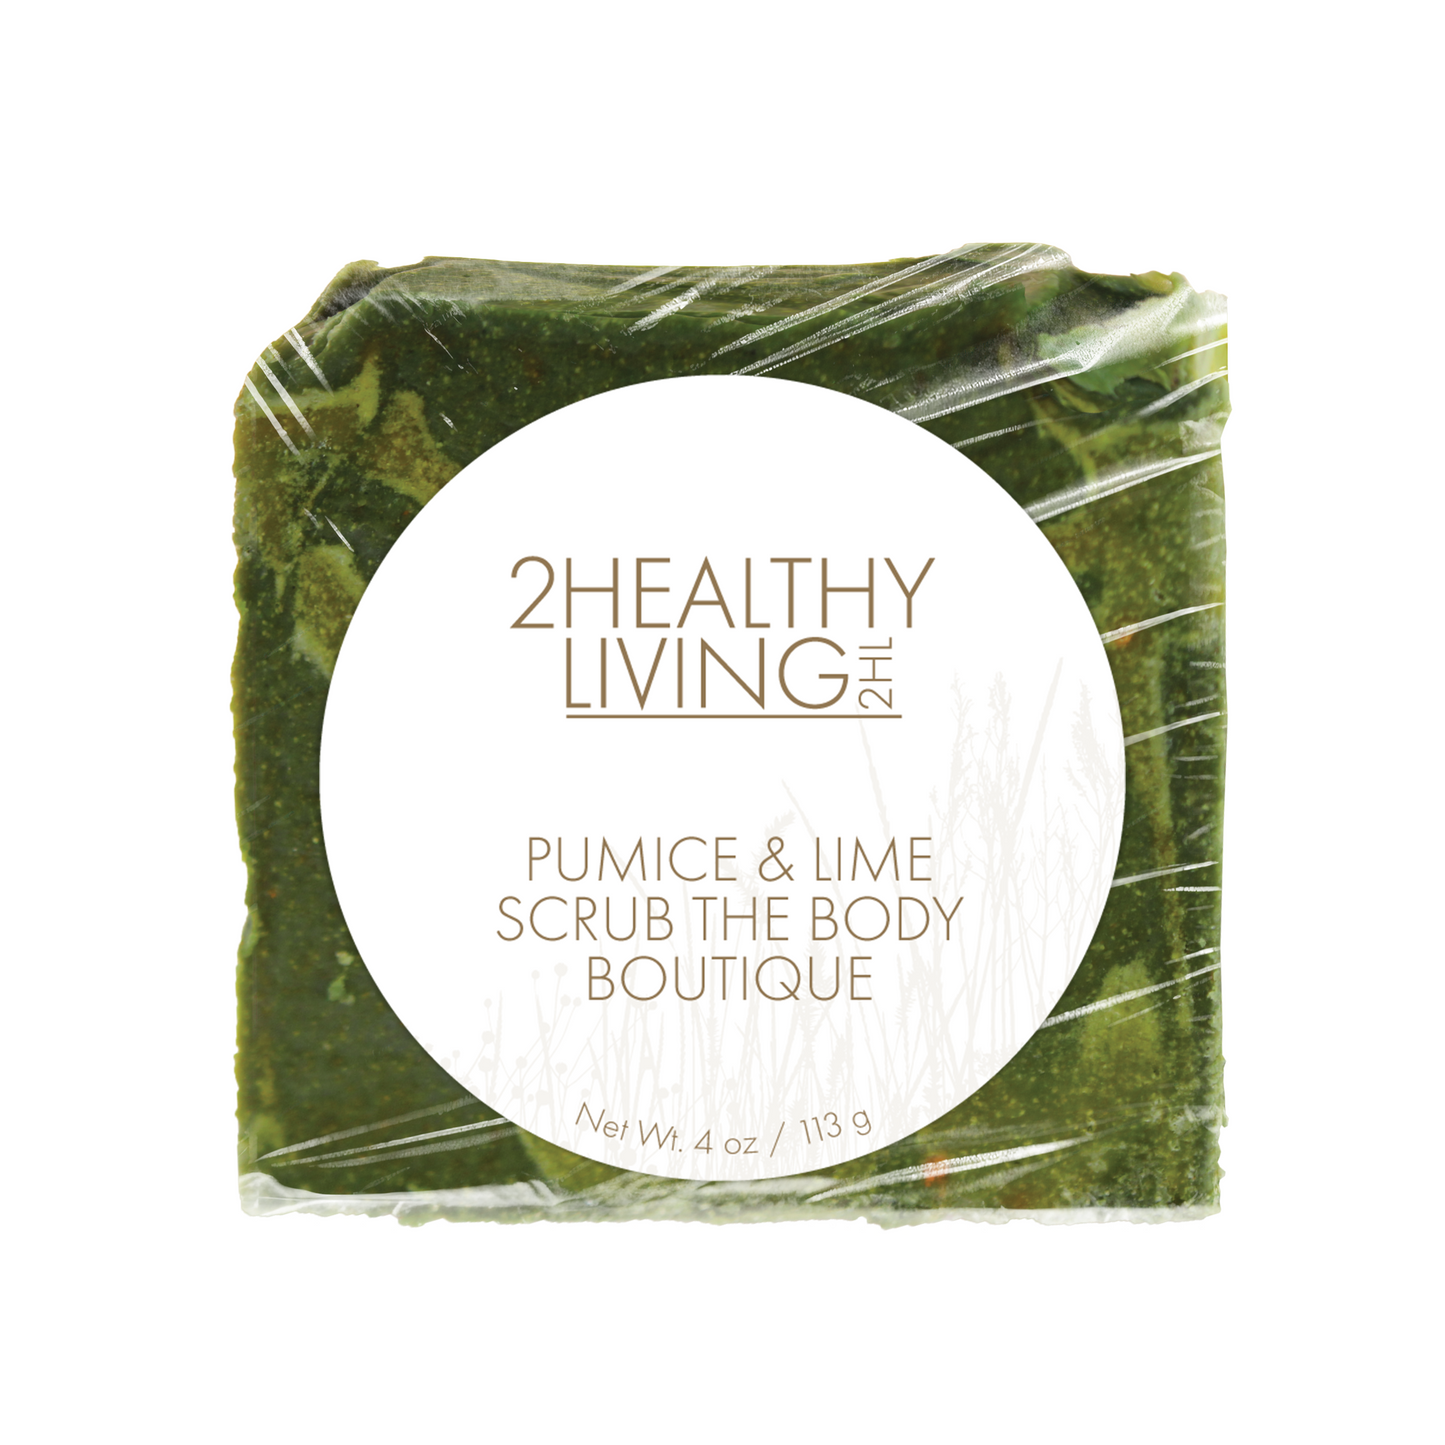 Pumice & Lime Scrub The Body Boutique